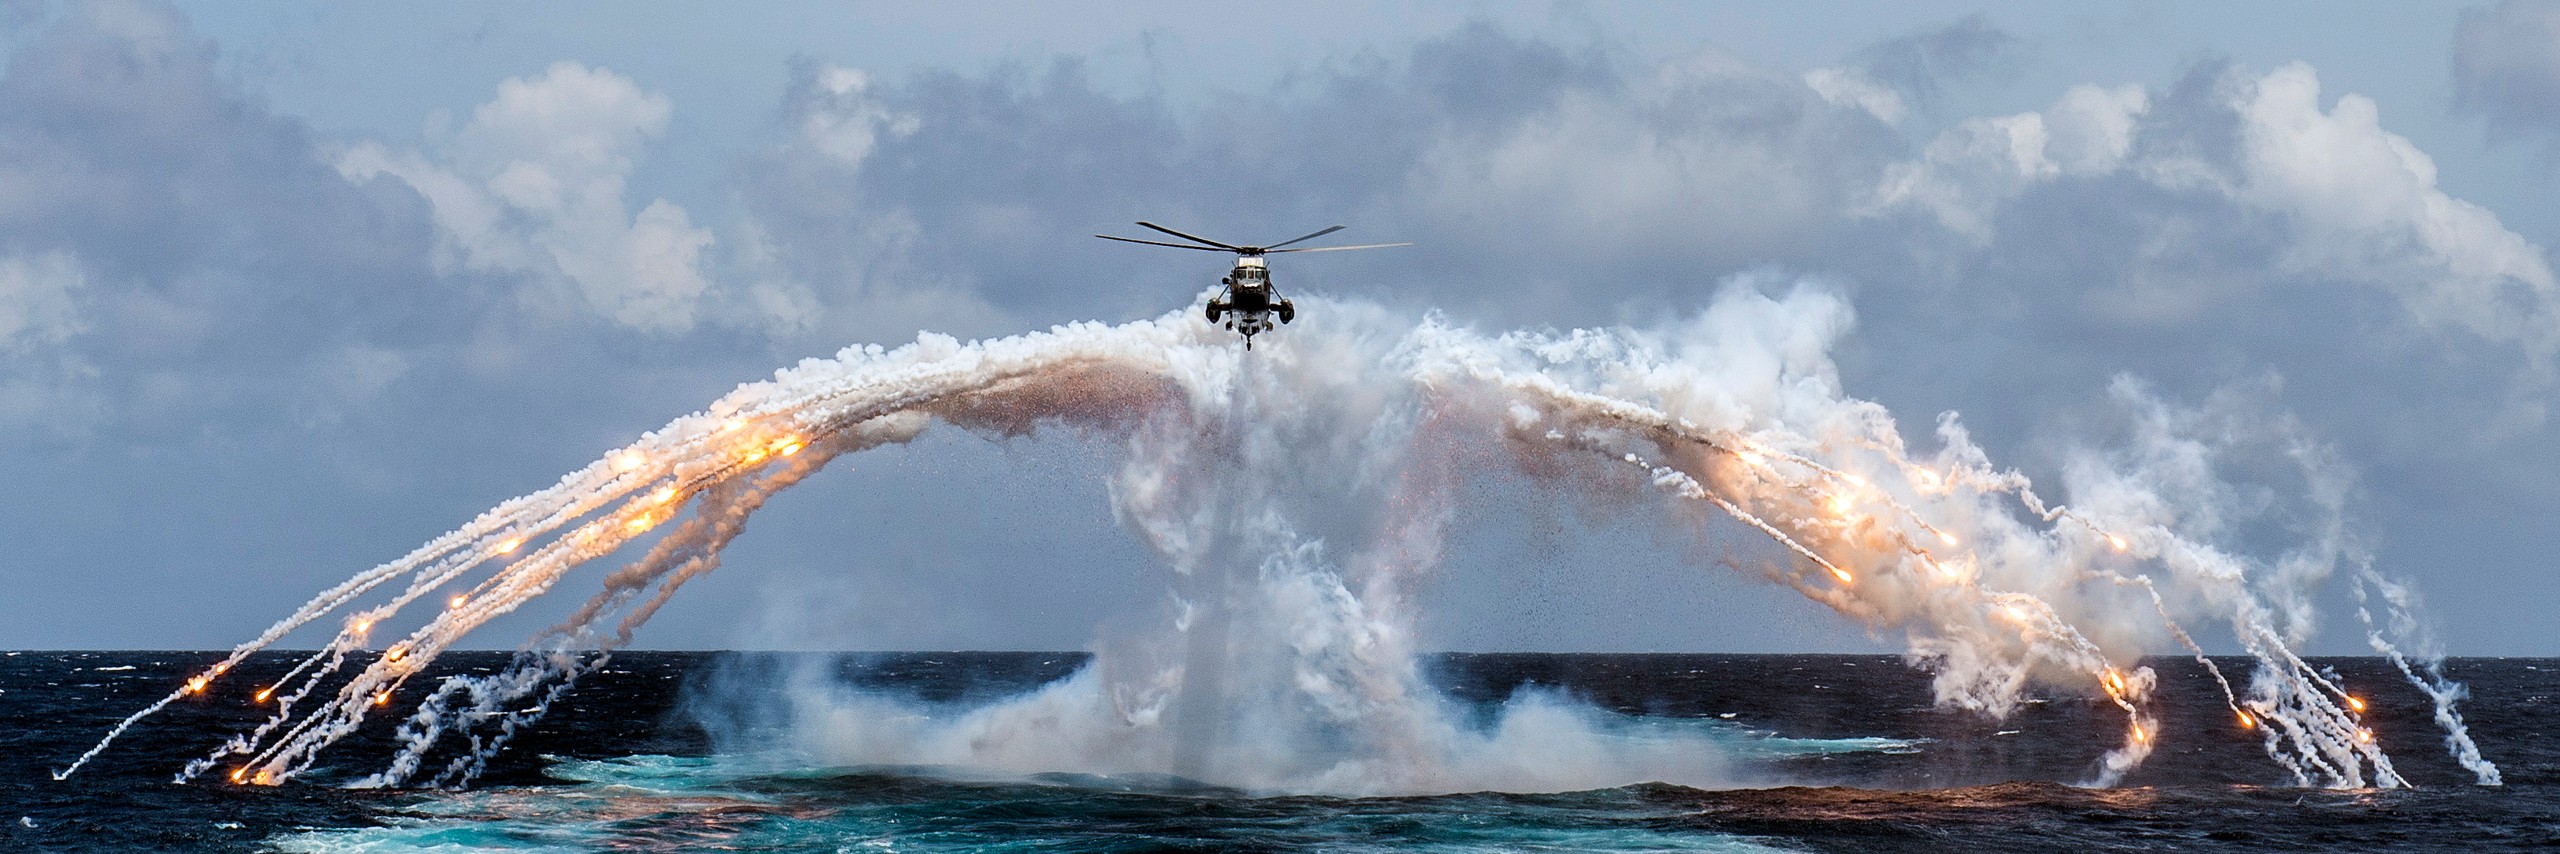 Wallpaper x px helicopters military aircraft x